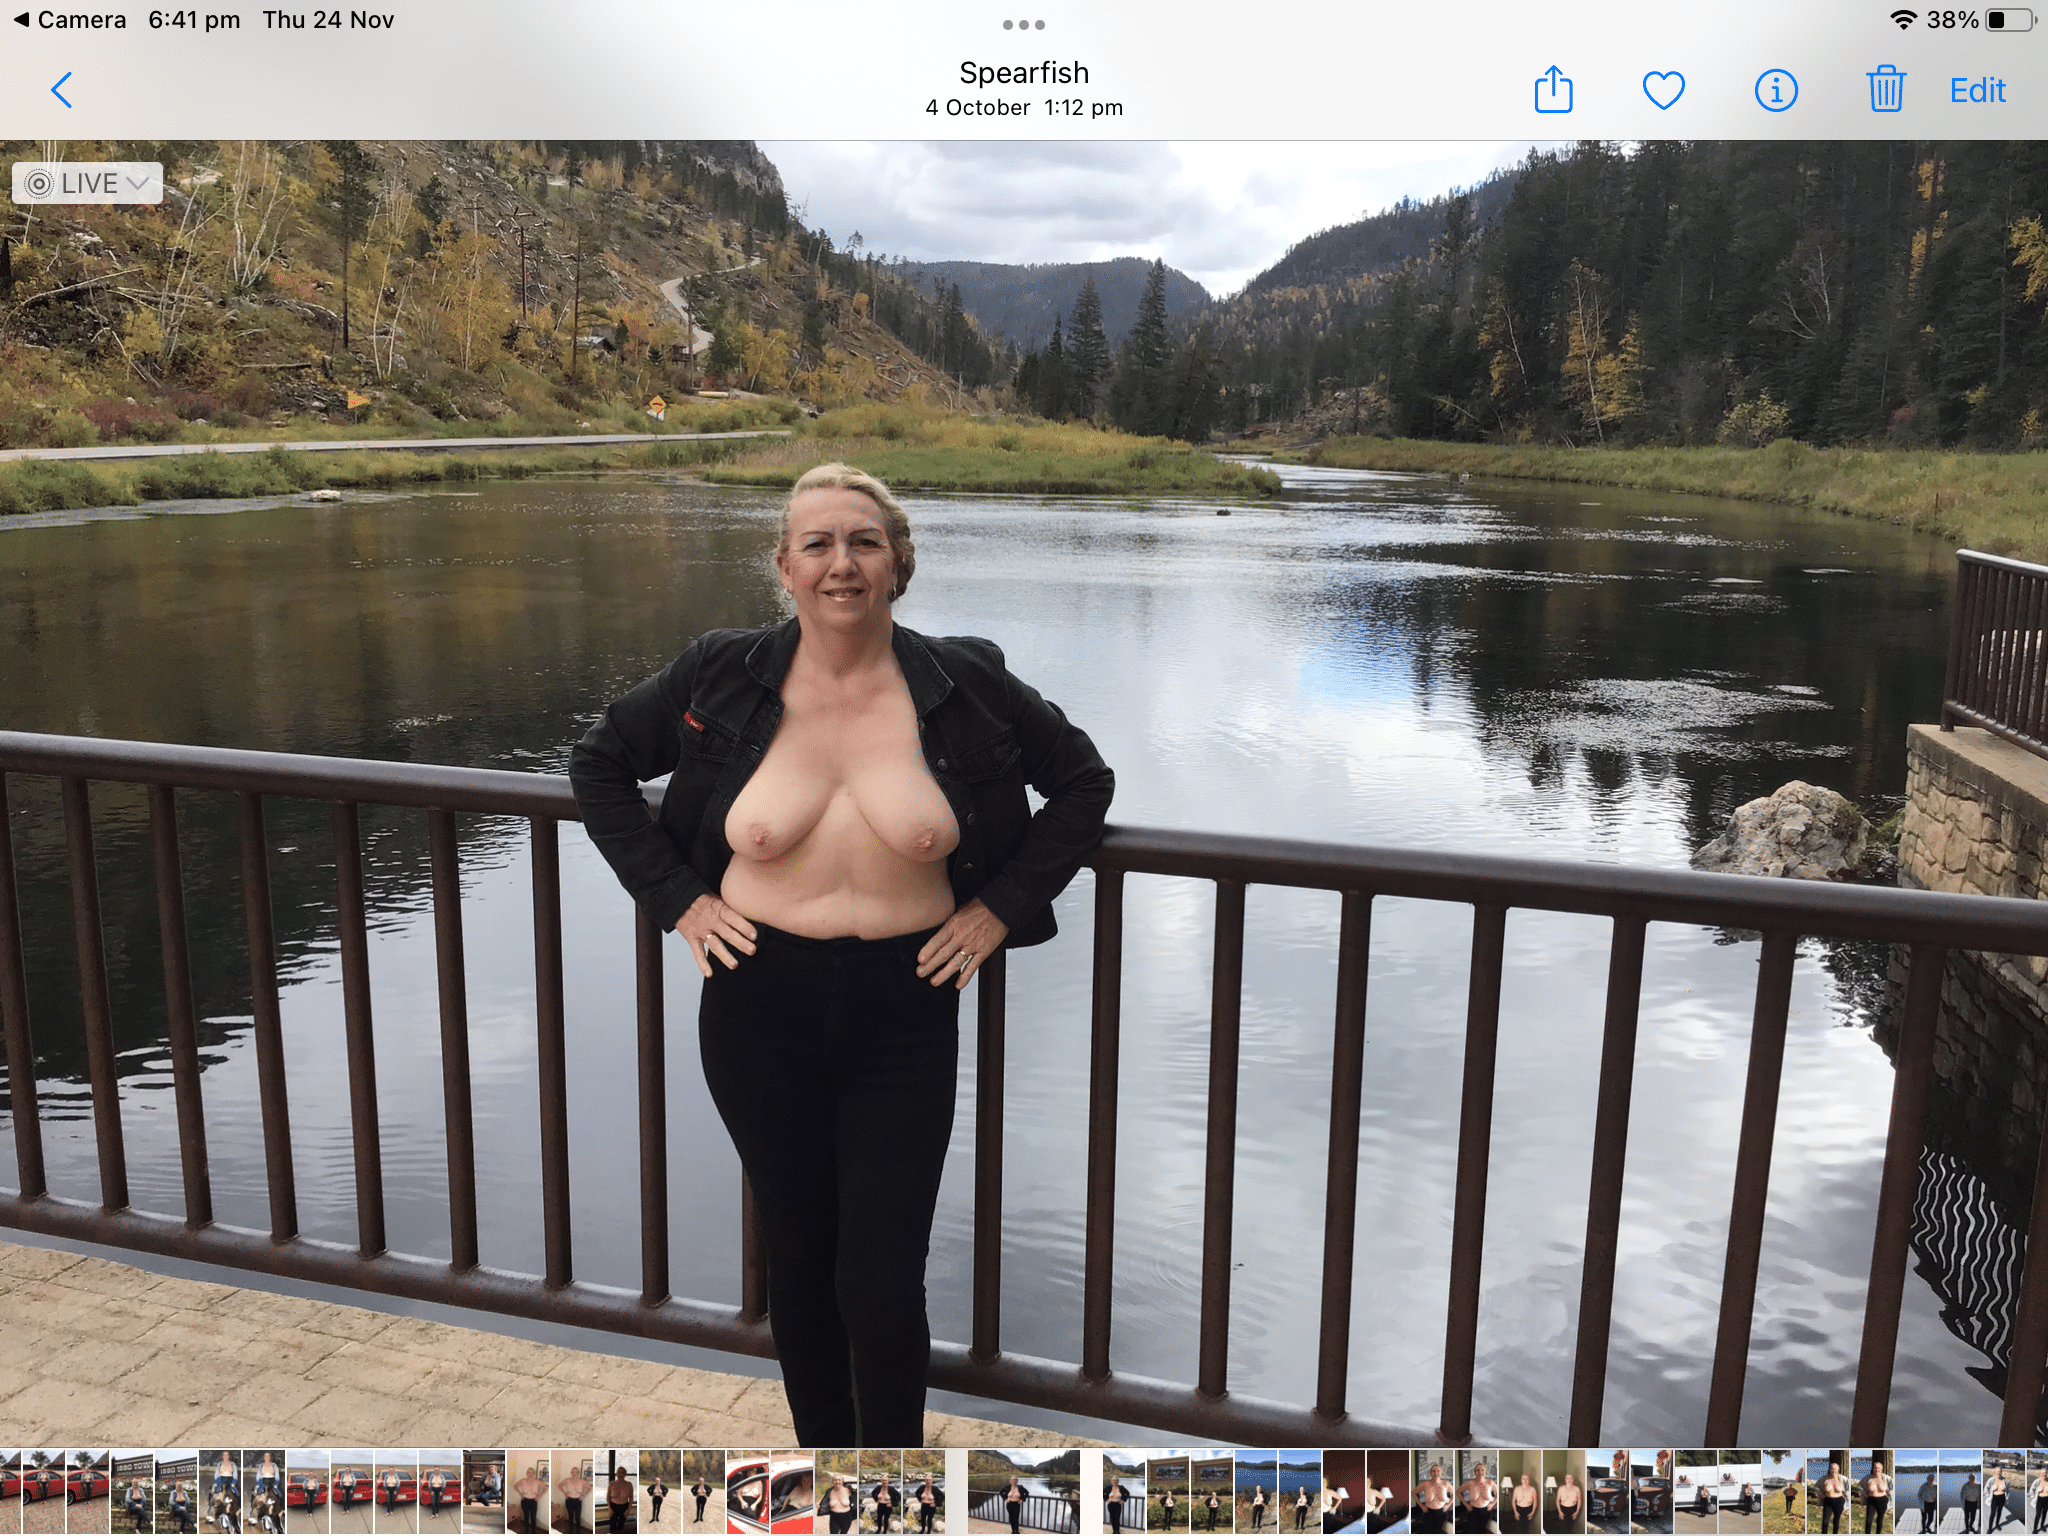 Getting my natural tits out at the lake real nudity mature howife boobs flash